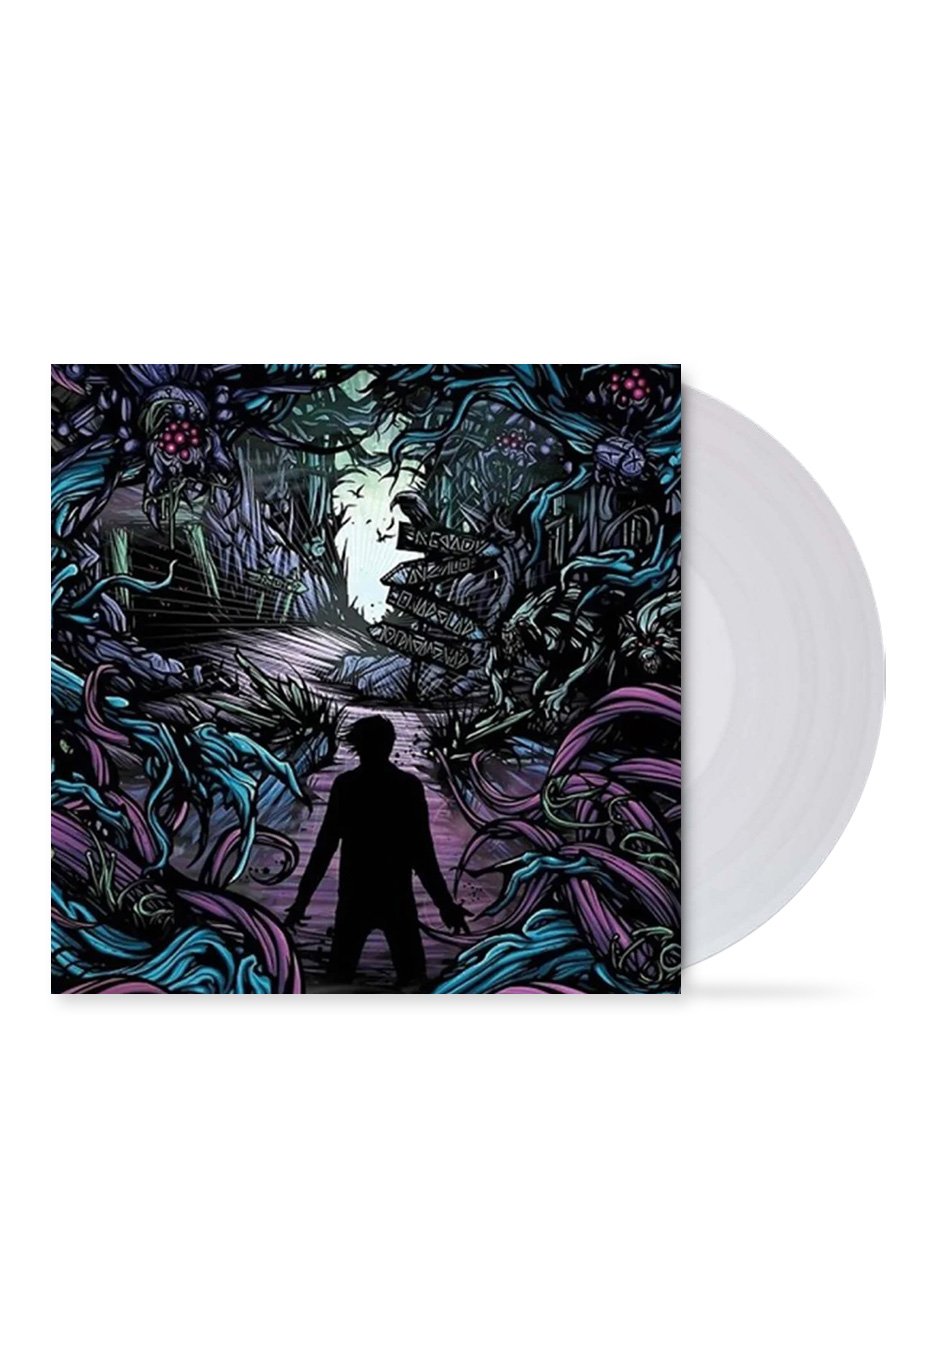 A Day To Remember - Homesick (15th Anniversary) Ltd. Clear - Colored 2 Vinyl